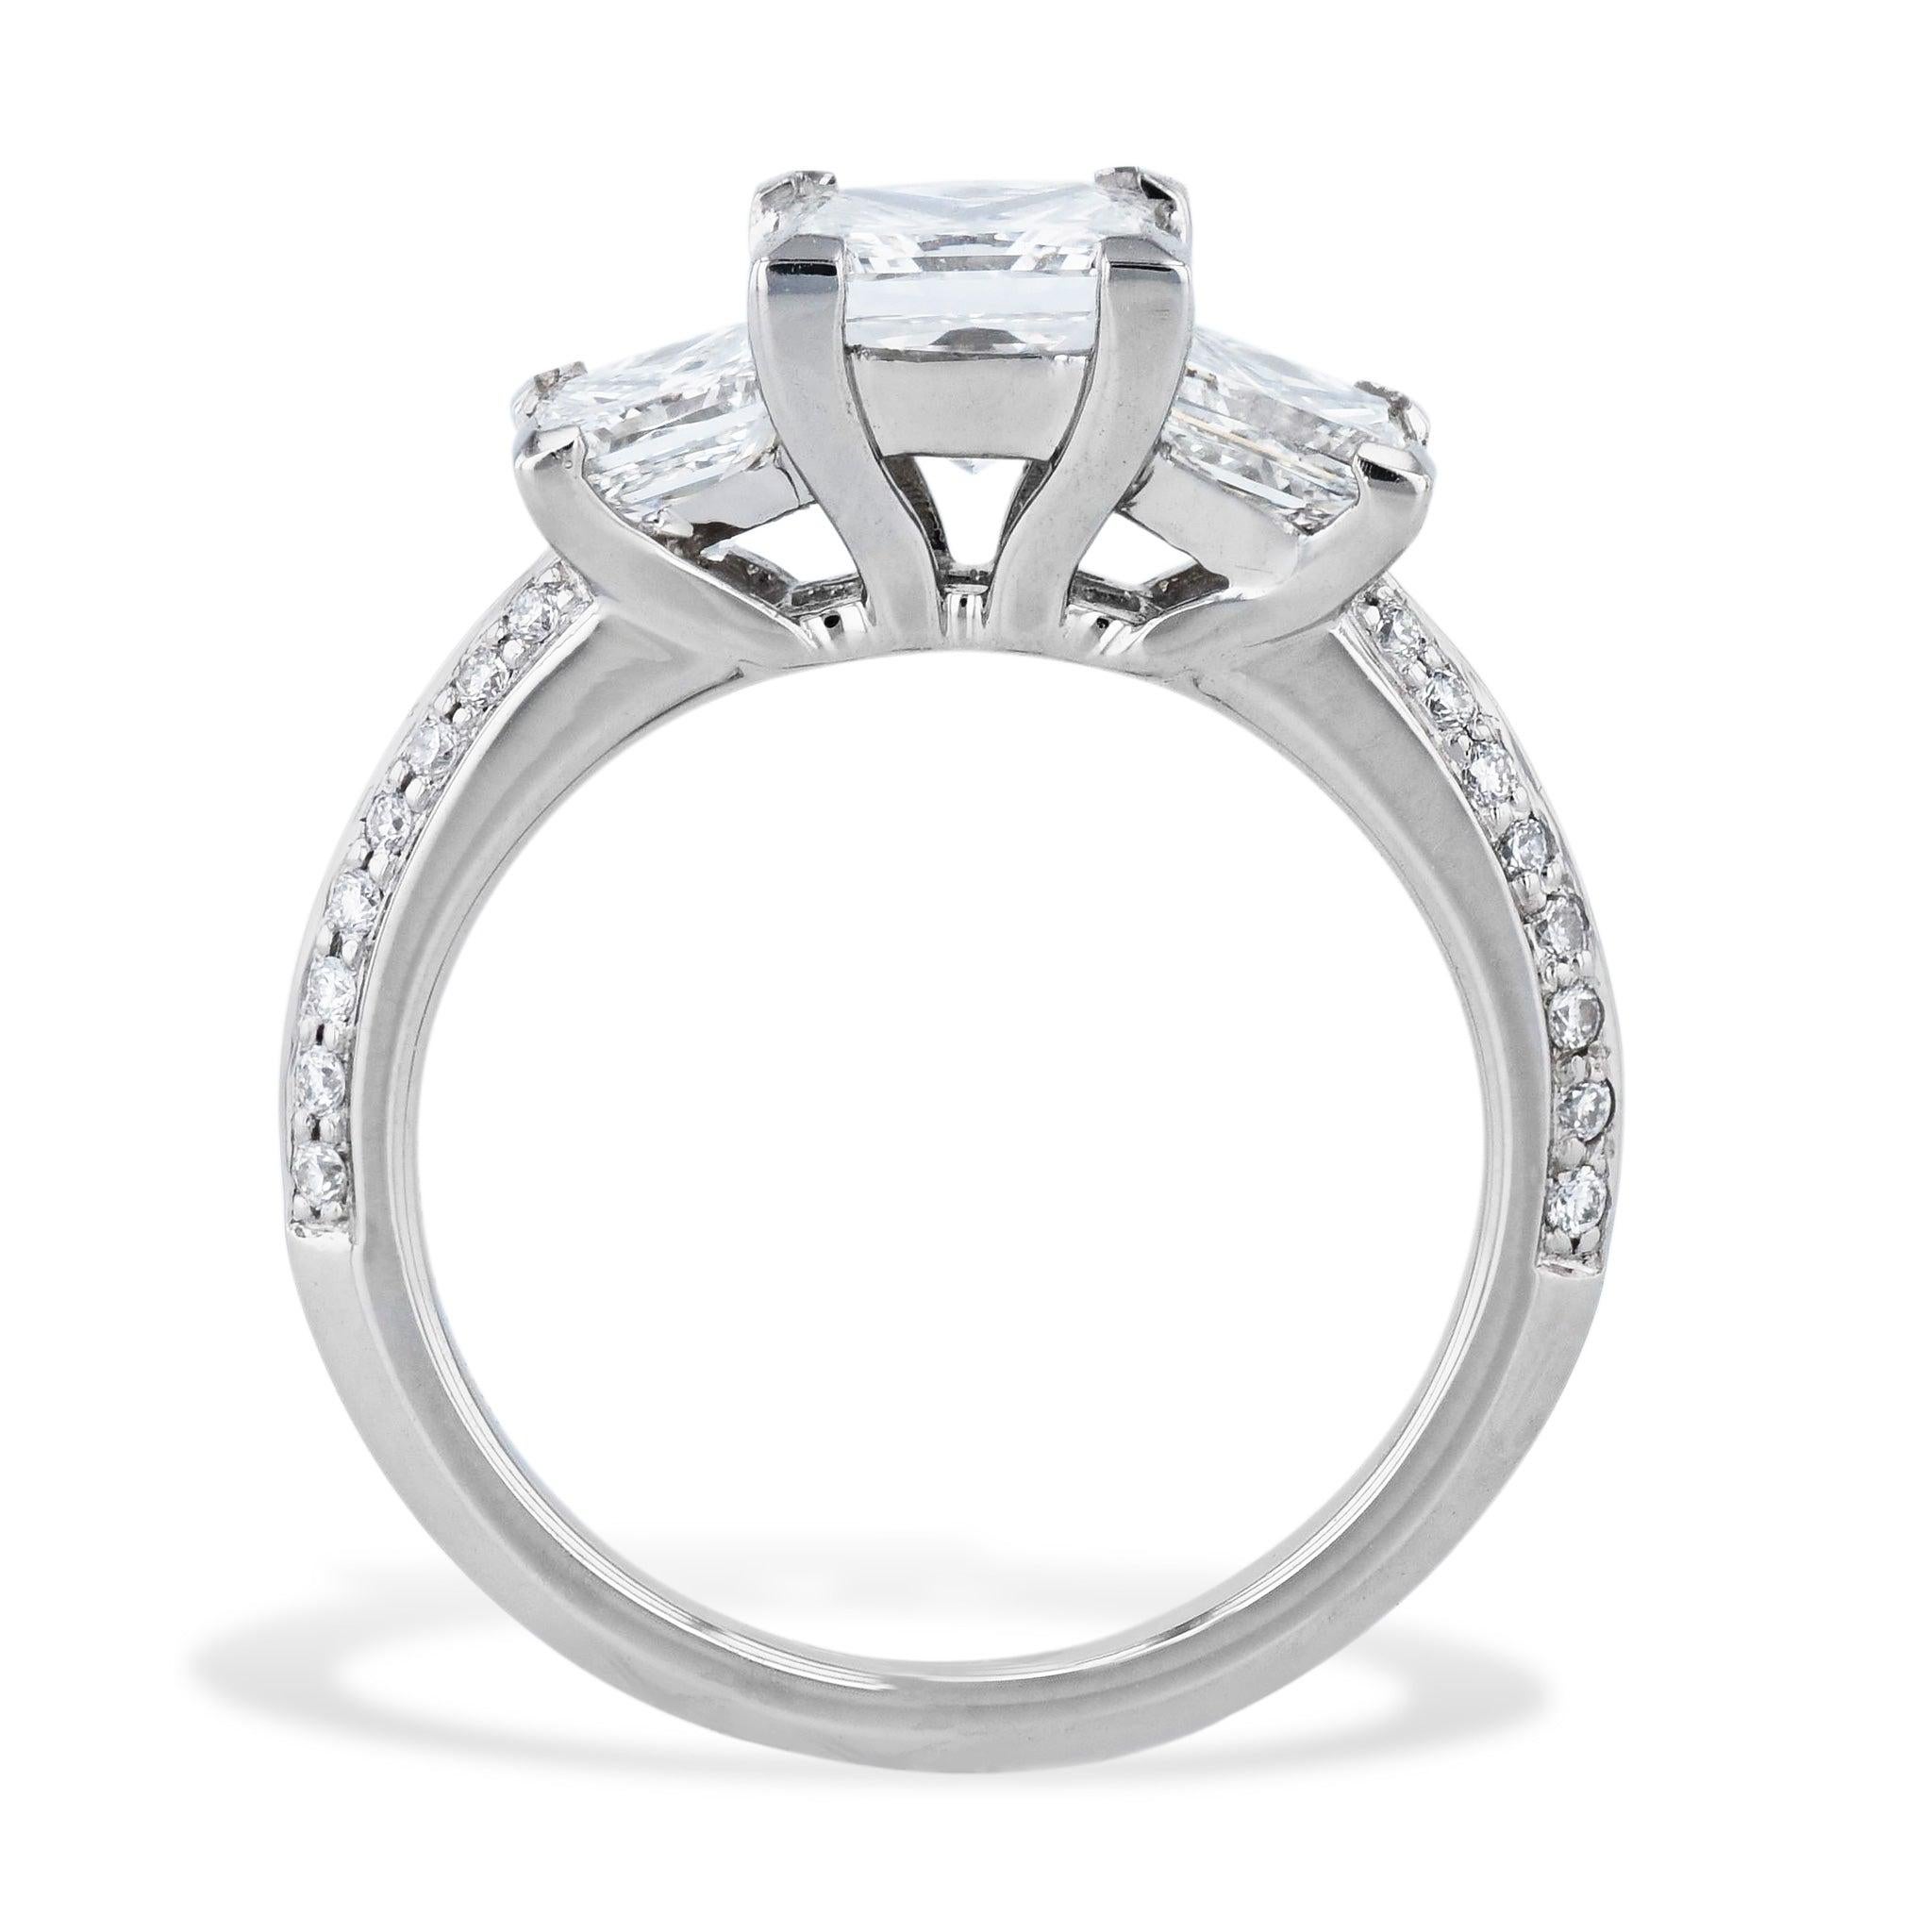 Showcase your eternal love with this stunning Platinum 3 Princess Cut Diamond Engagement Ring. The gleaming center diamond  is flanked by are two brilliant diamond side stones, and a diamond pave of 32 stones down the shank. This exquisite piece is